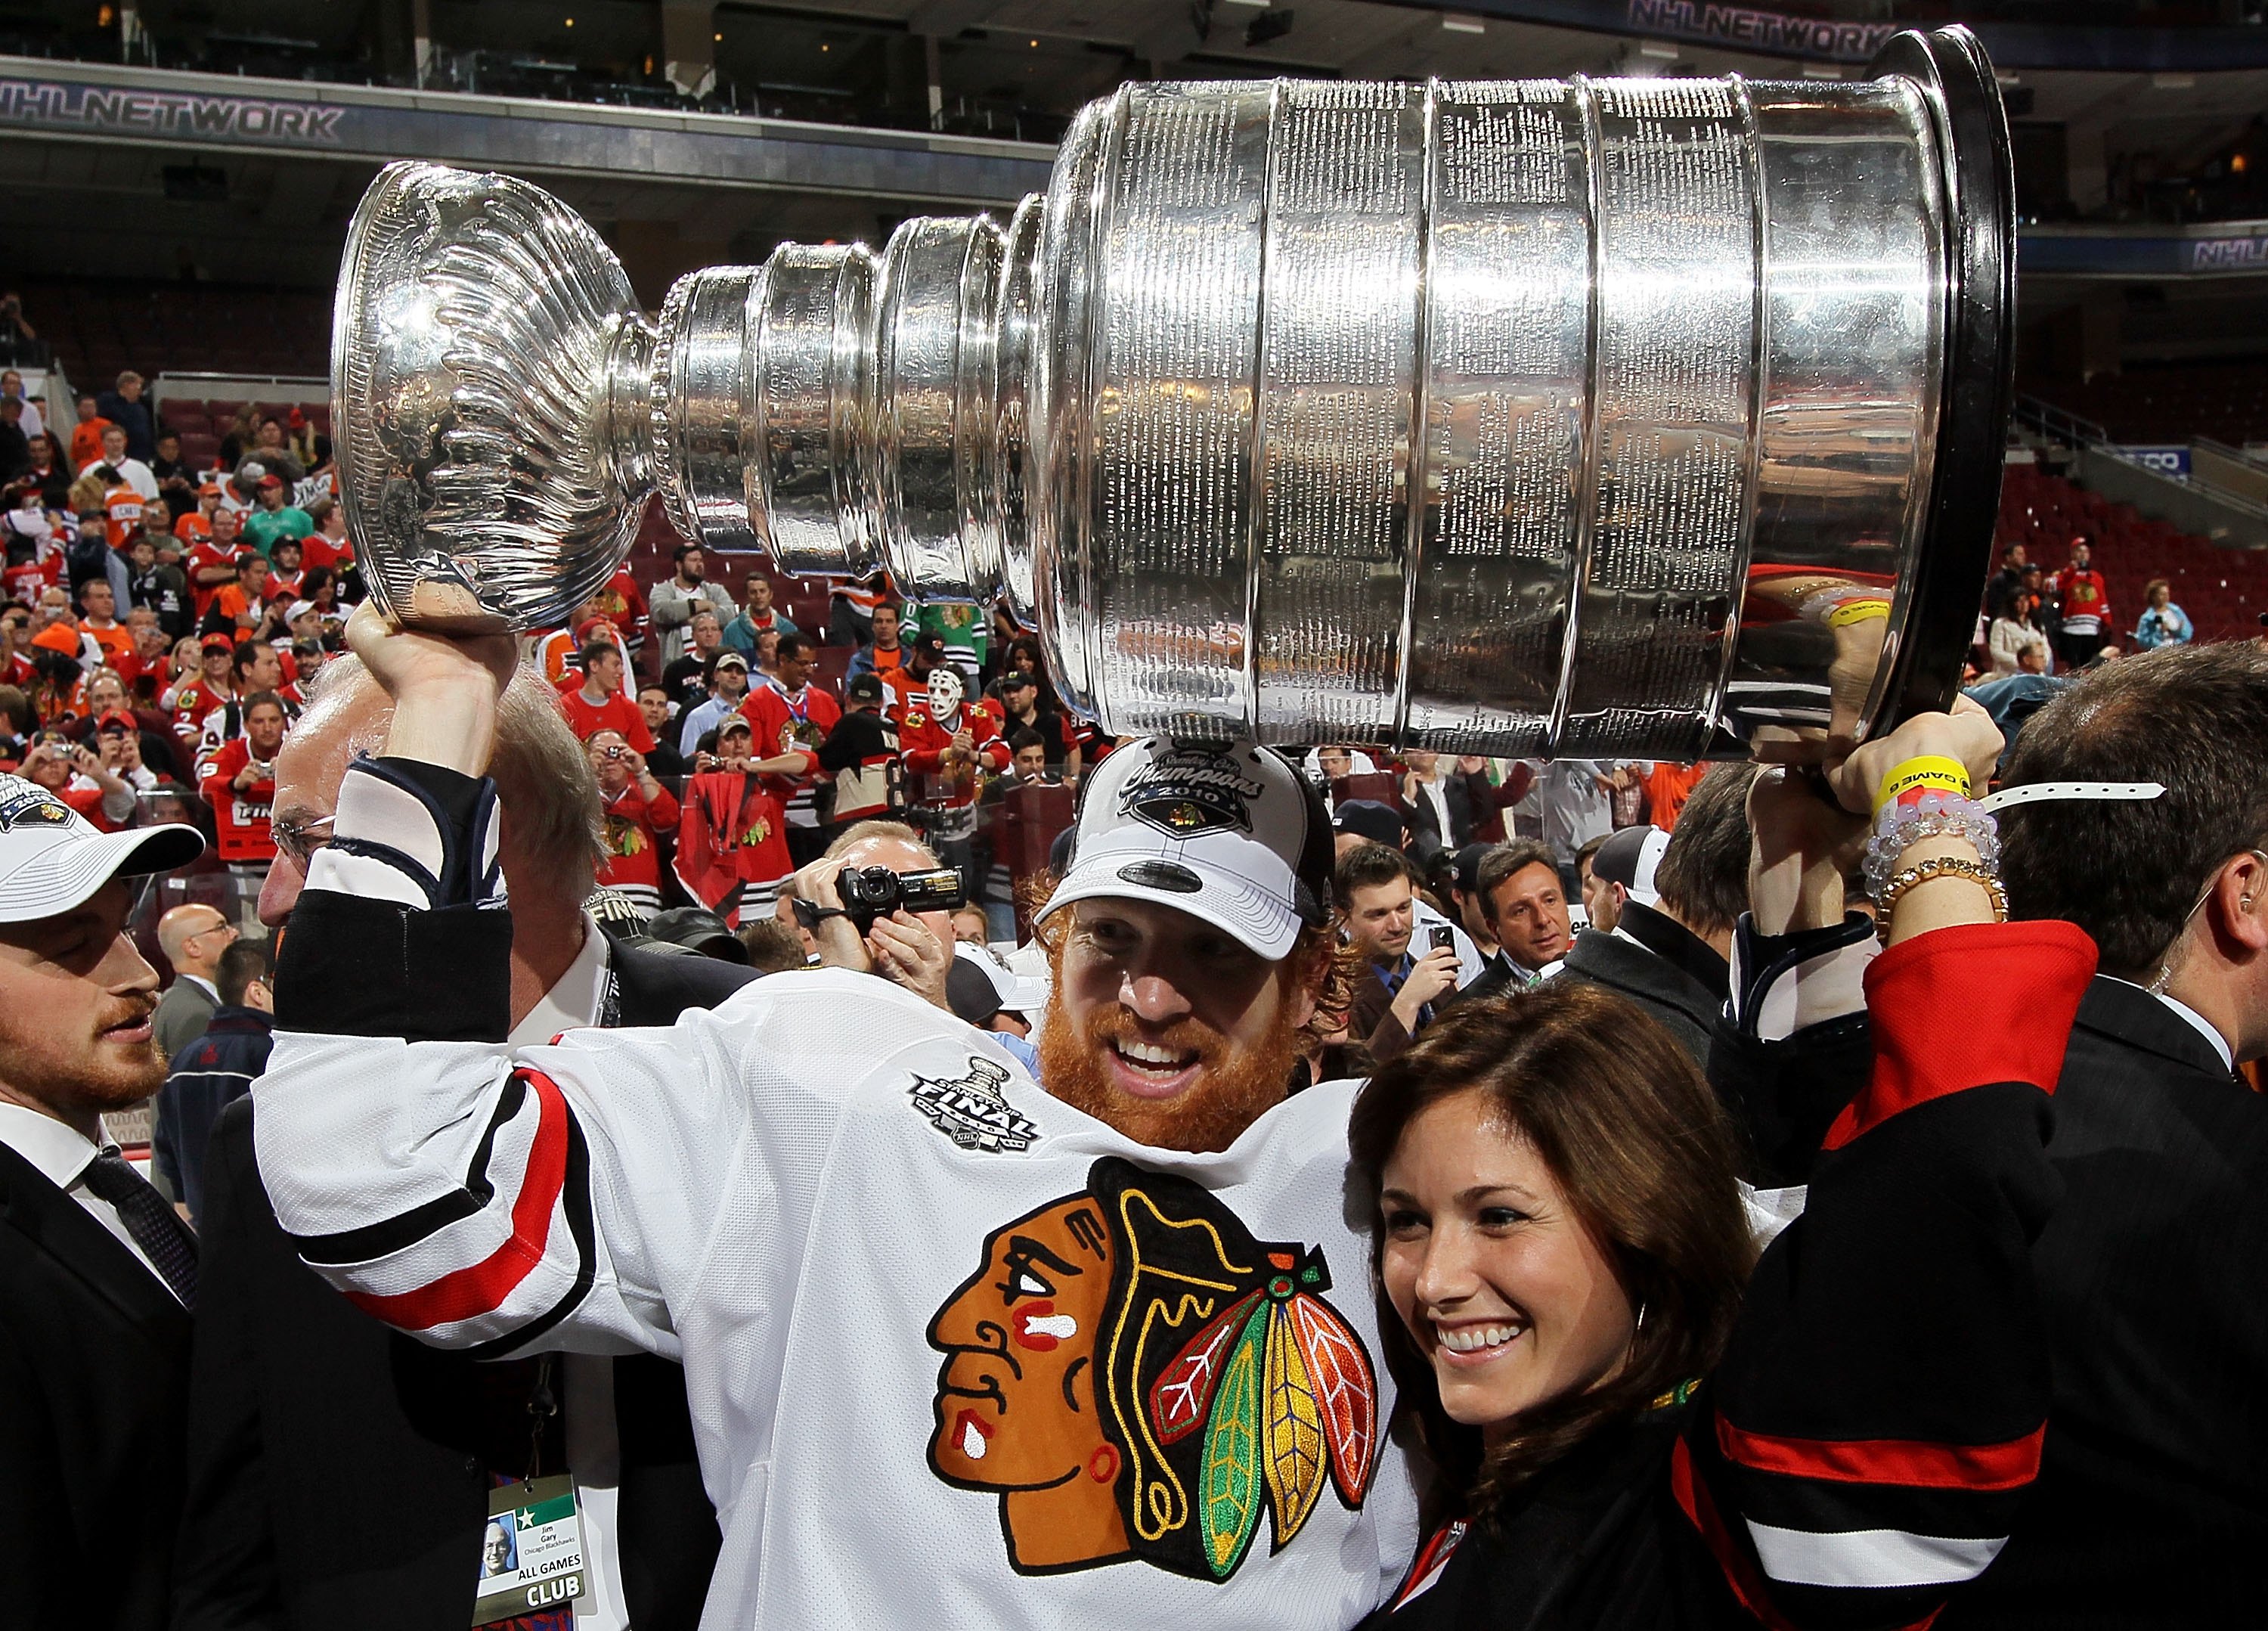 This Week in Chicago Blackhawks History: Stanley Cup Playoff highs